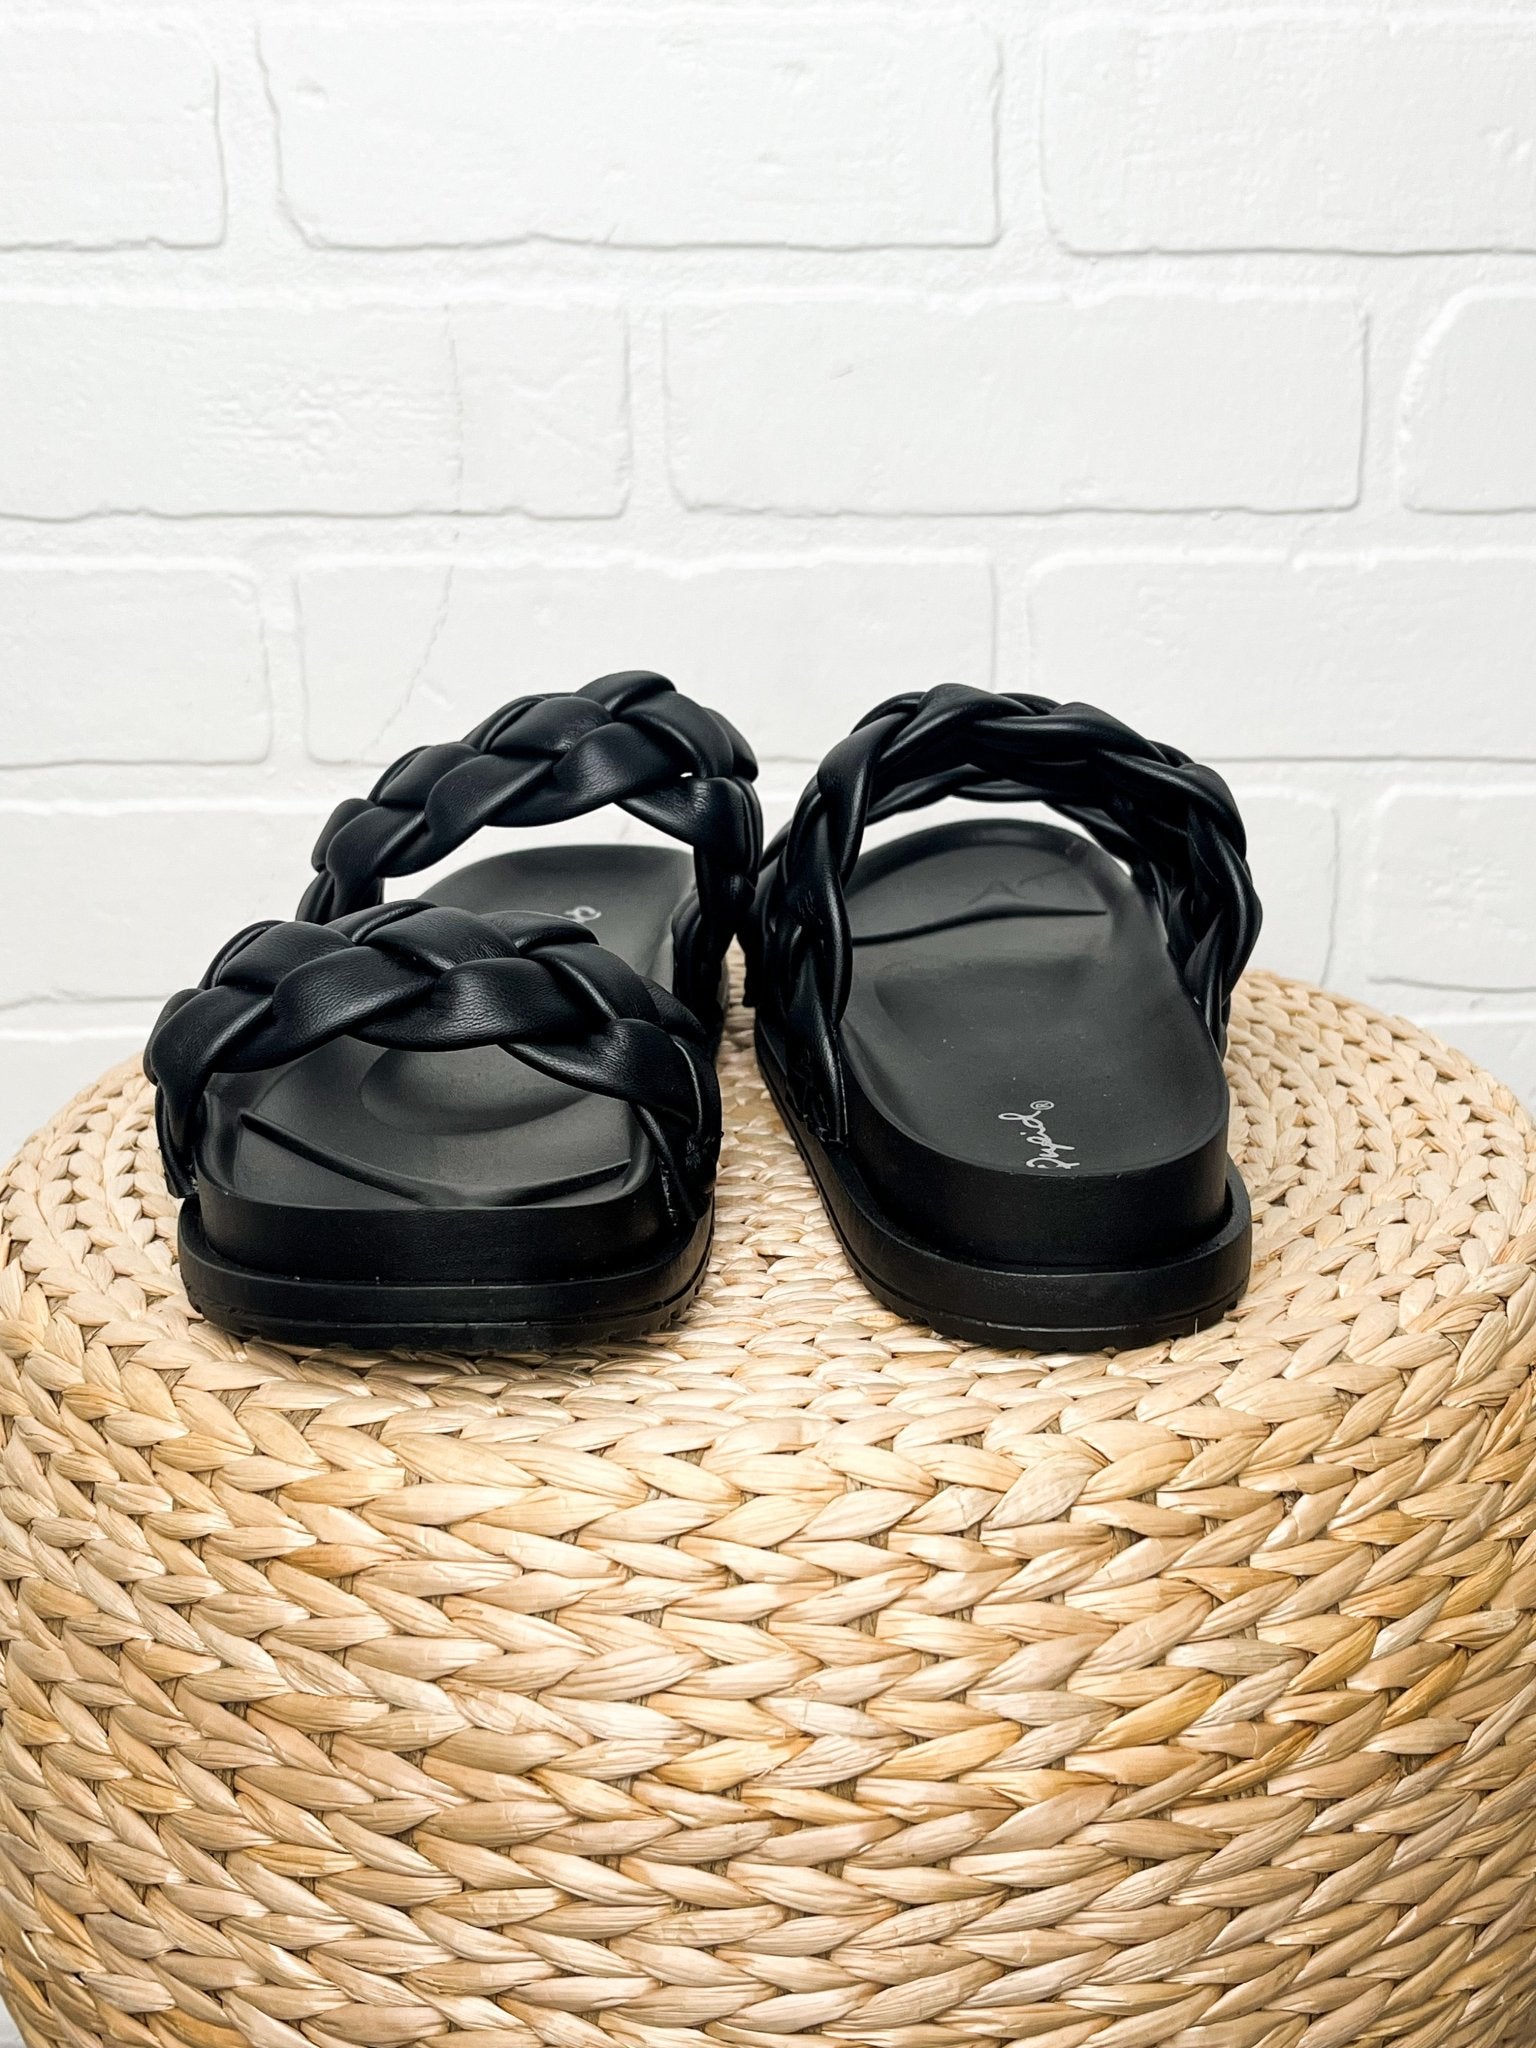 Albina braided sandal black - Affordable shoes - Boutique Shoes at Lush Fashion Lounge Boutique in Oklahoma City